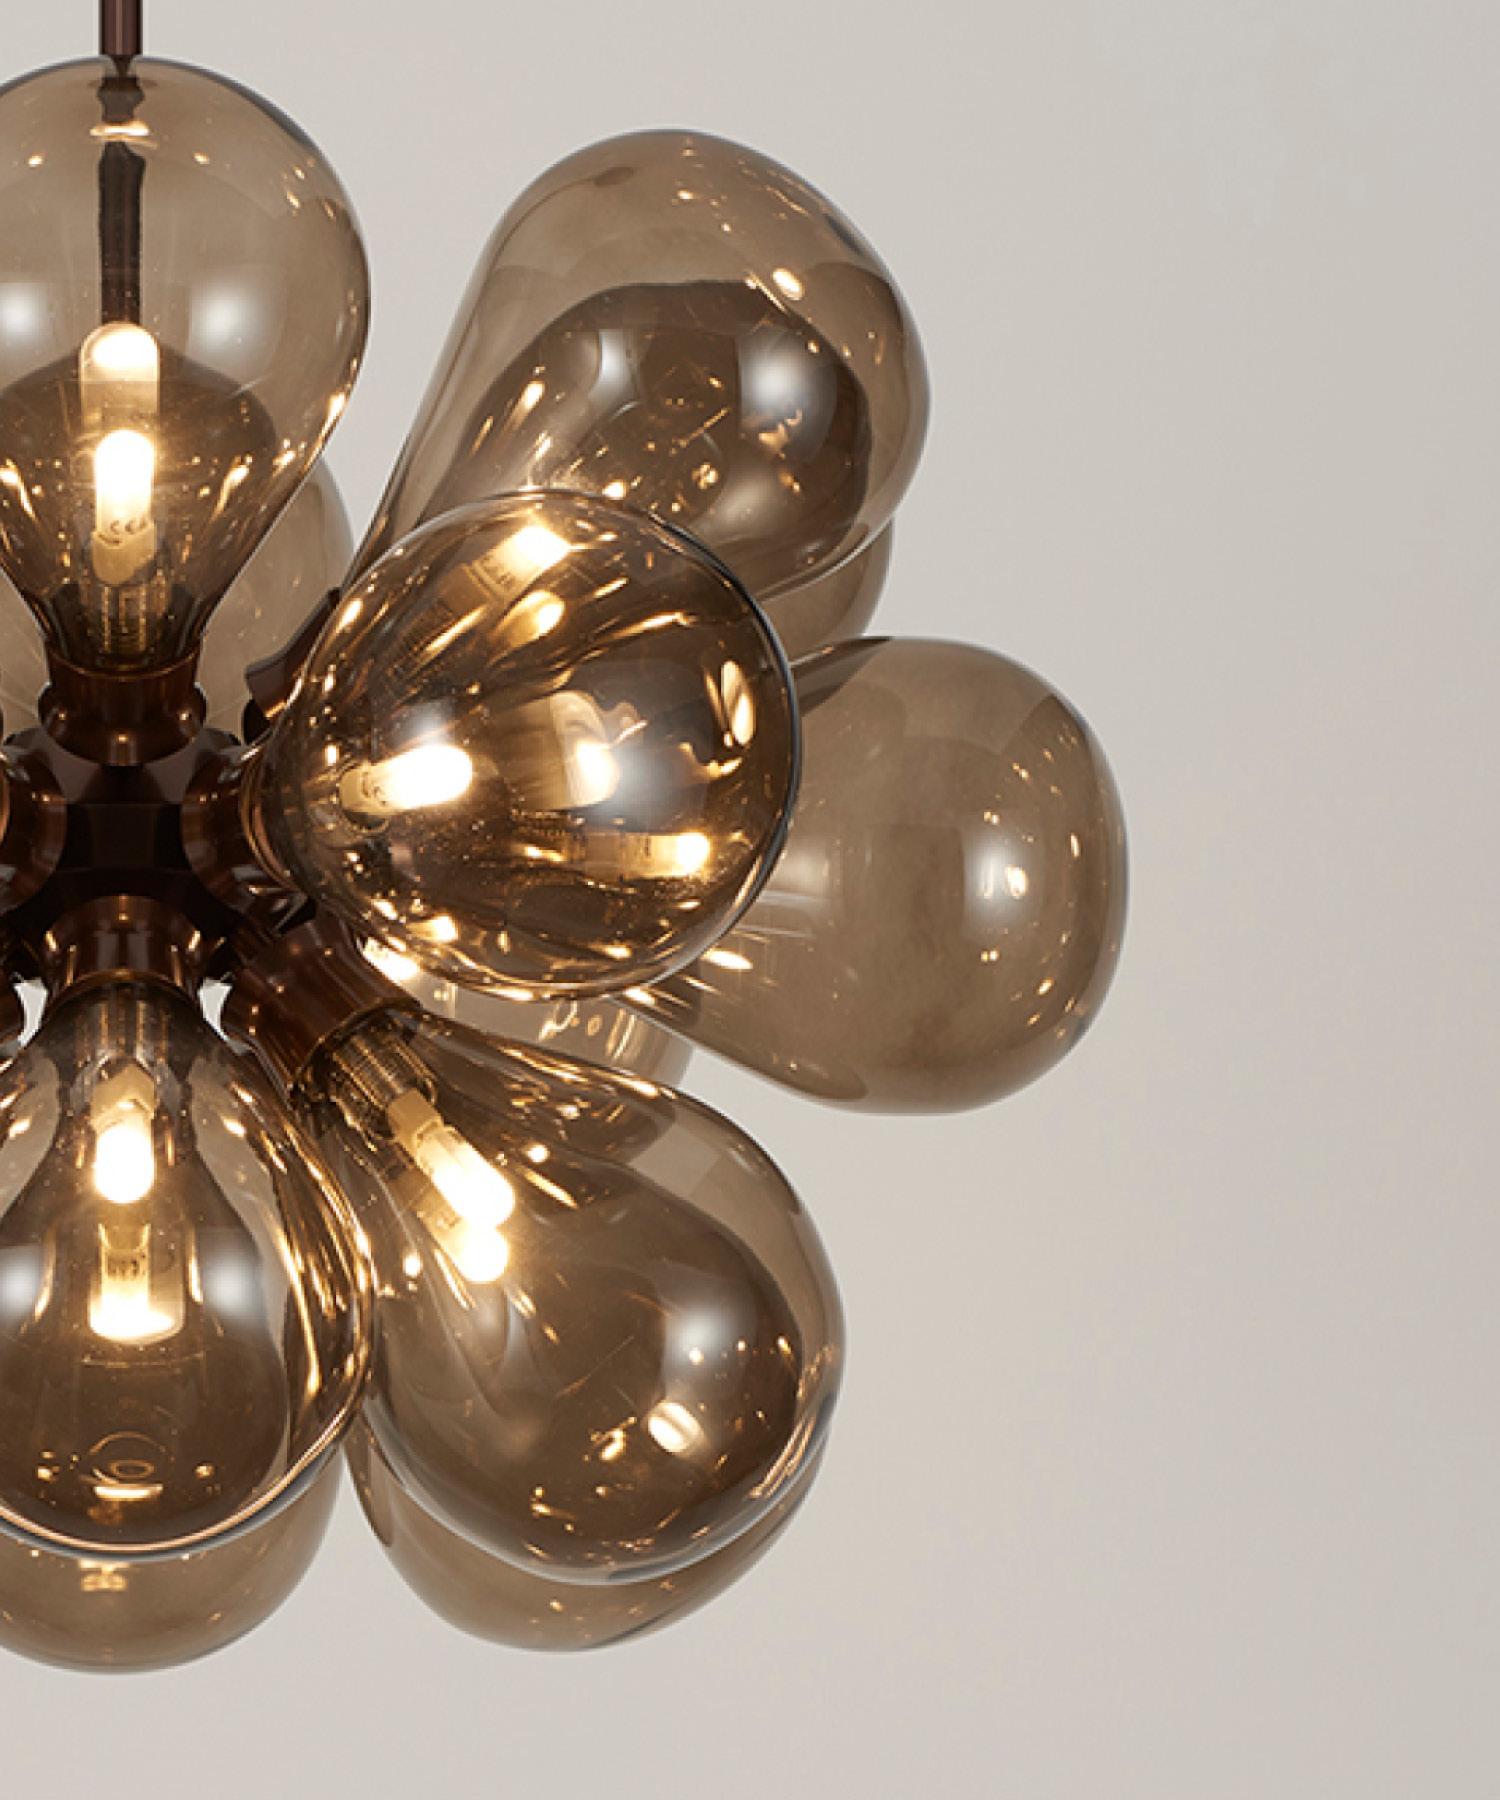 Cintola Maxi Pendant in Satin Bronze with 18 Handblown Frosted Glass Globes For Sale 4